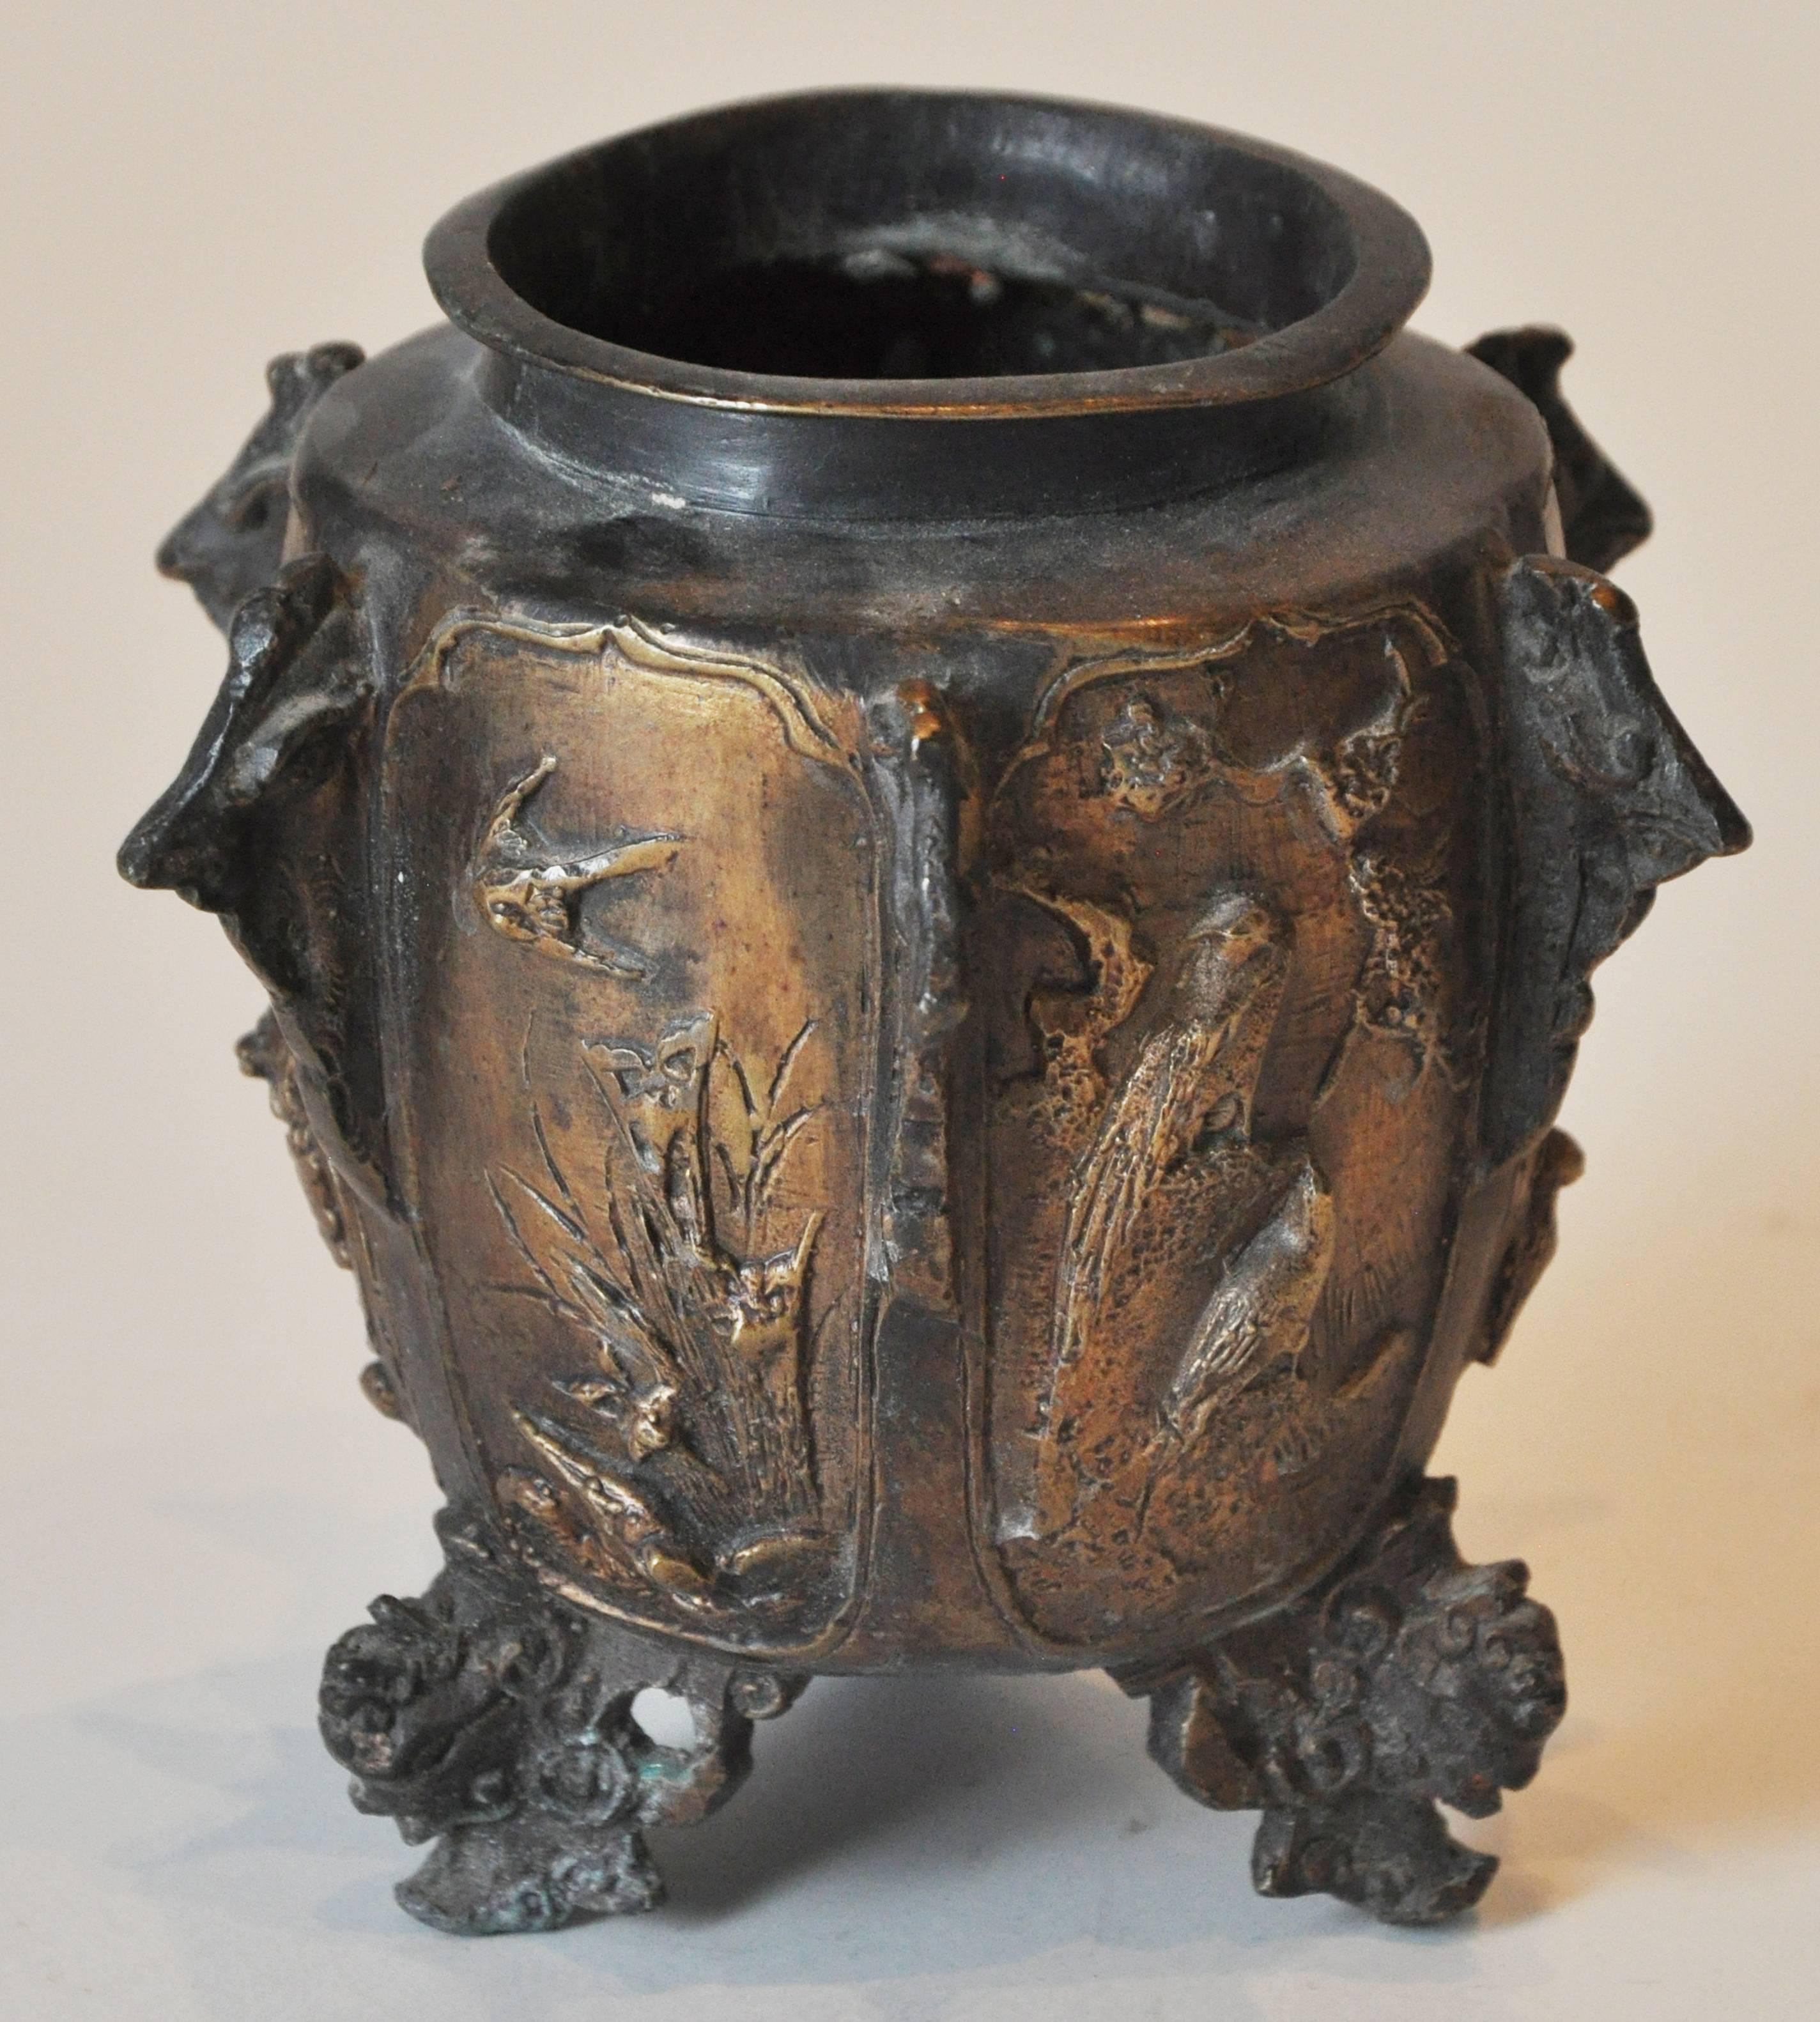 19th century German bronze footed urn. Features gargoyle feet and six natural scenes of birds divided by projected intricacies.

Dimensions: 6